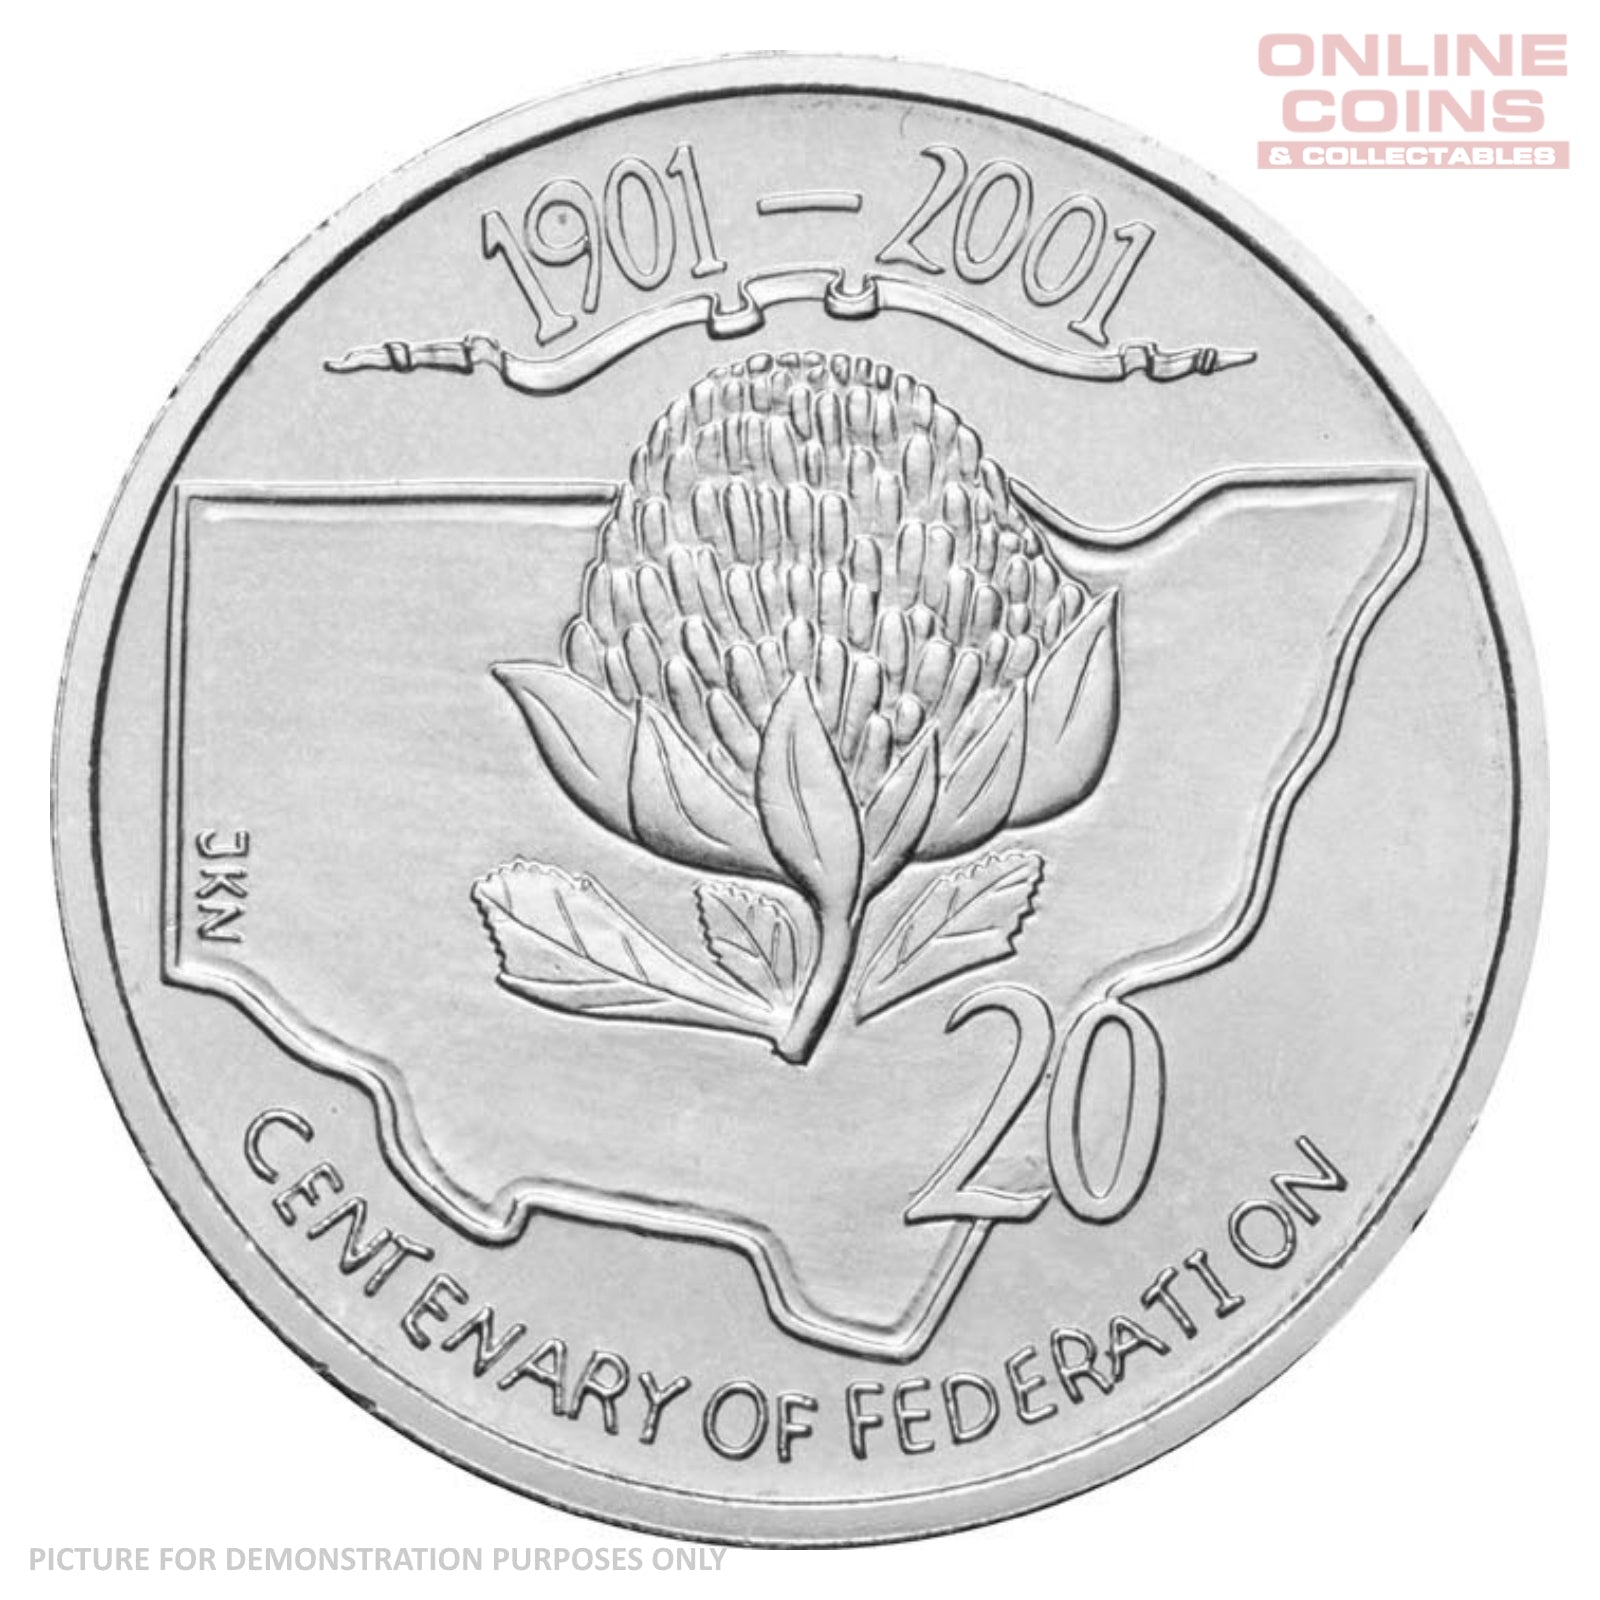 2001 RAM Centenary of Federation 20c Circulating Coin - NEW SOUTH WALES